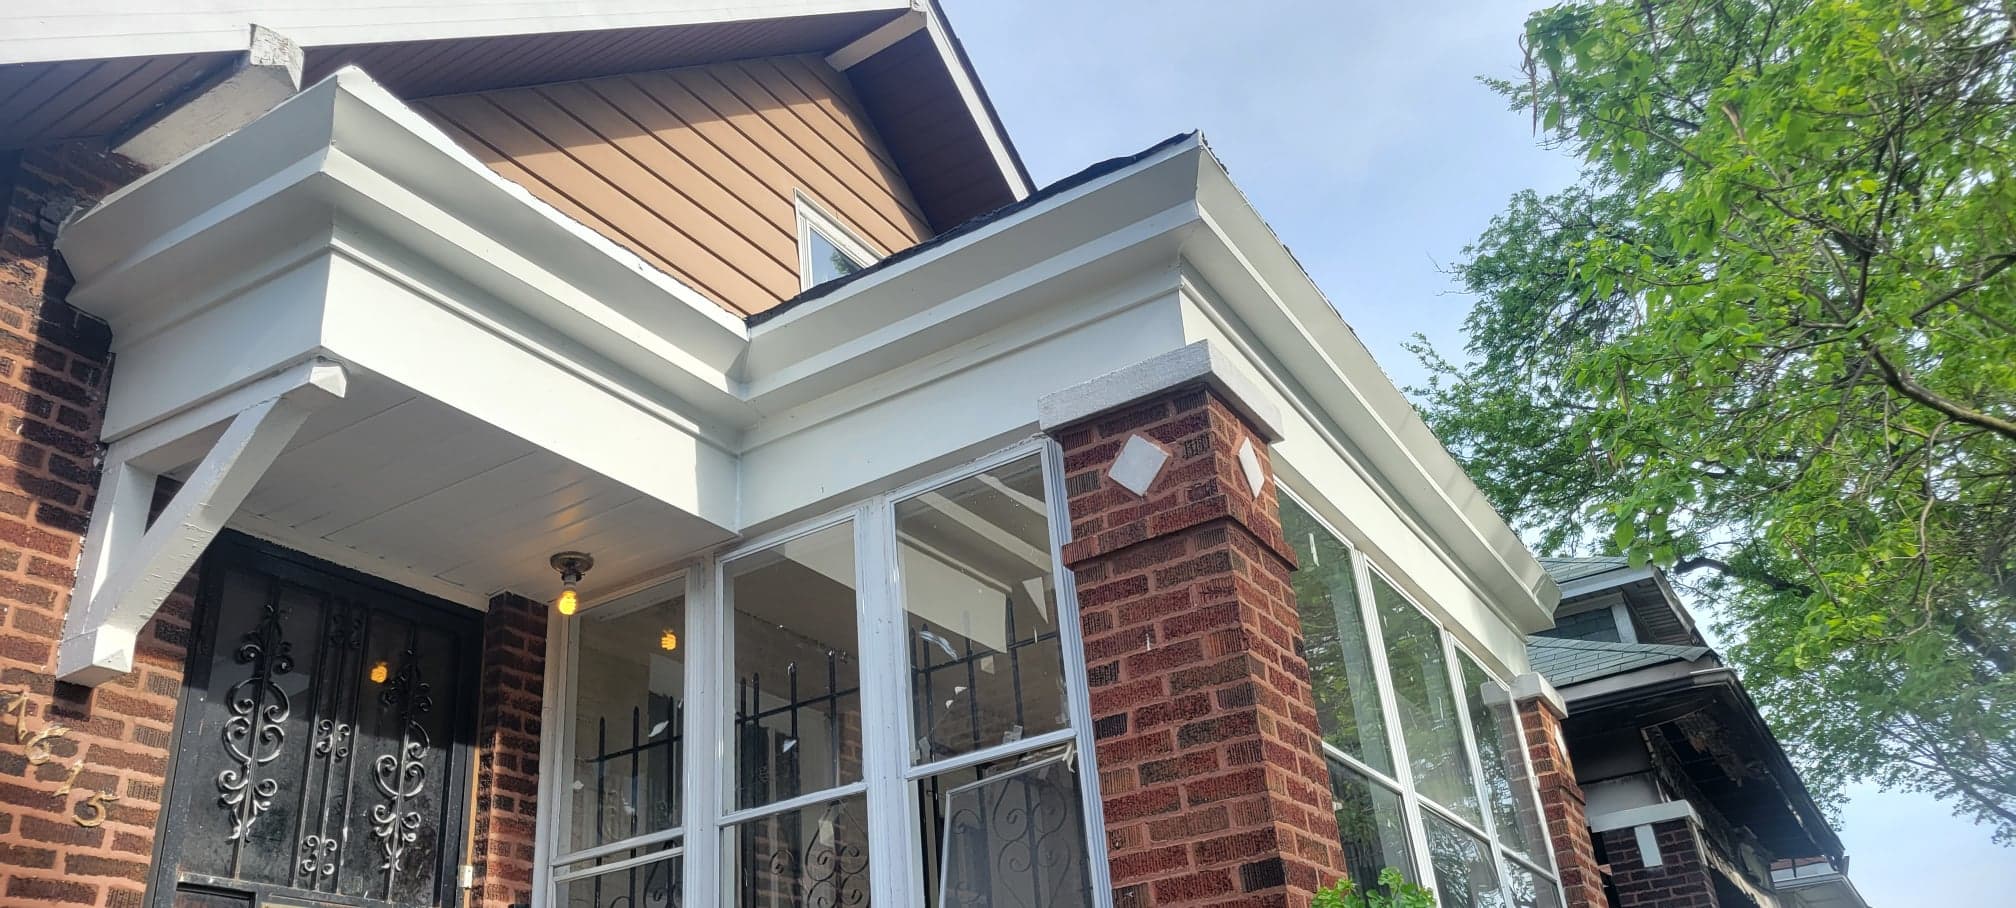 soffit and fascia repair in Chicago Illinois, soffit and fascia service near me